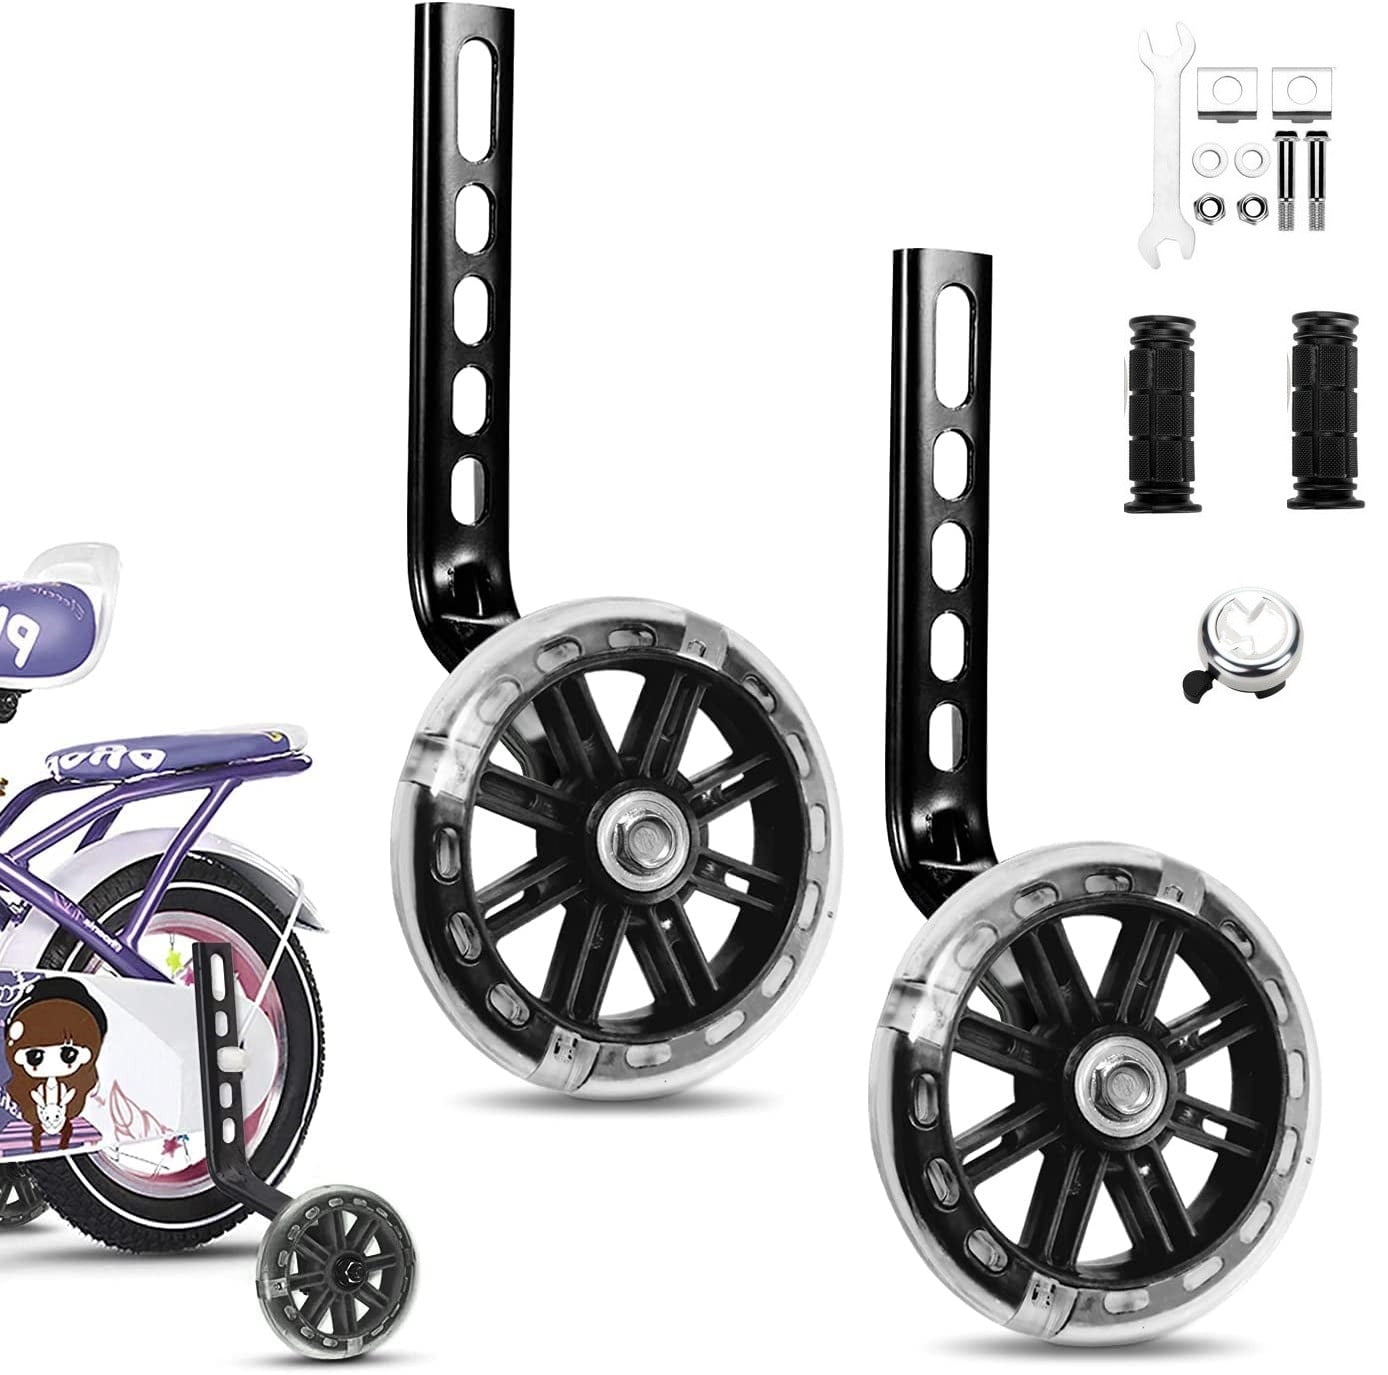 Heavy Duty Kids Bicycle Stabilizers Mounted Kit 1 Pair Fit fot 14 16 18 inch Bikes Training Wheels 